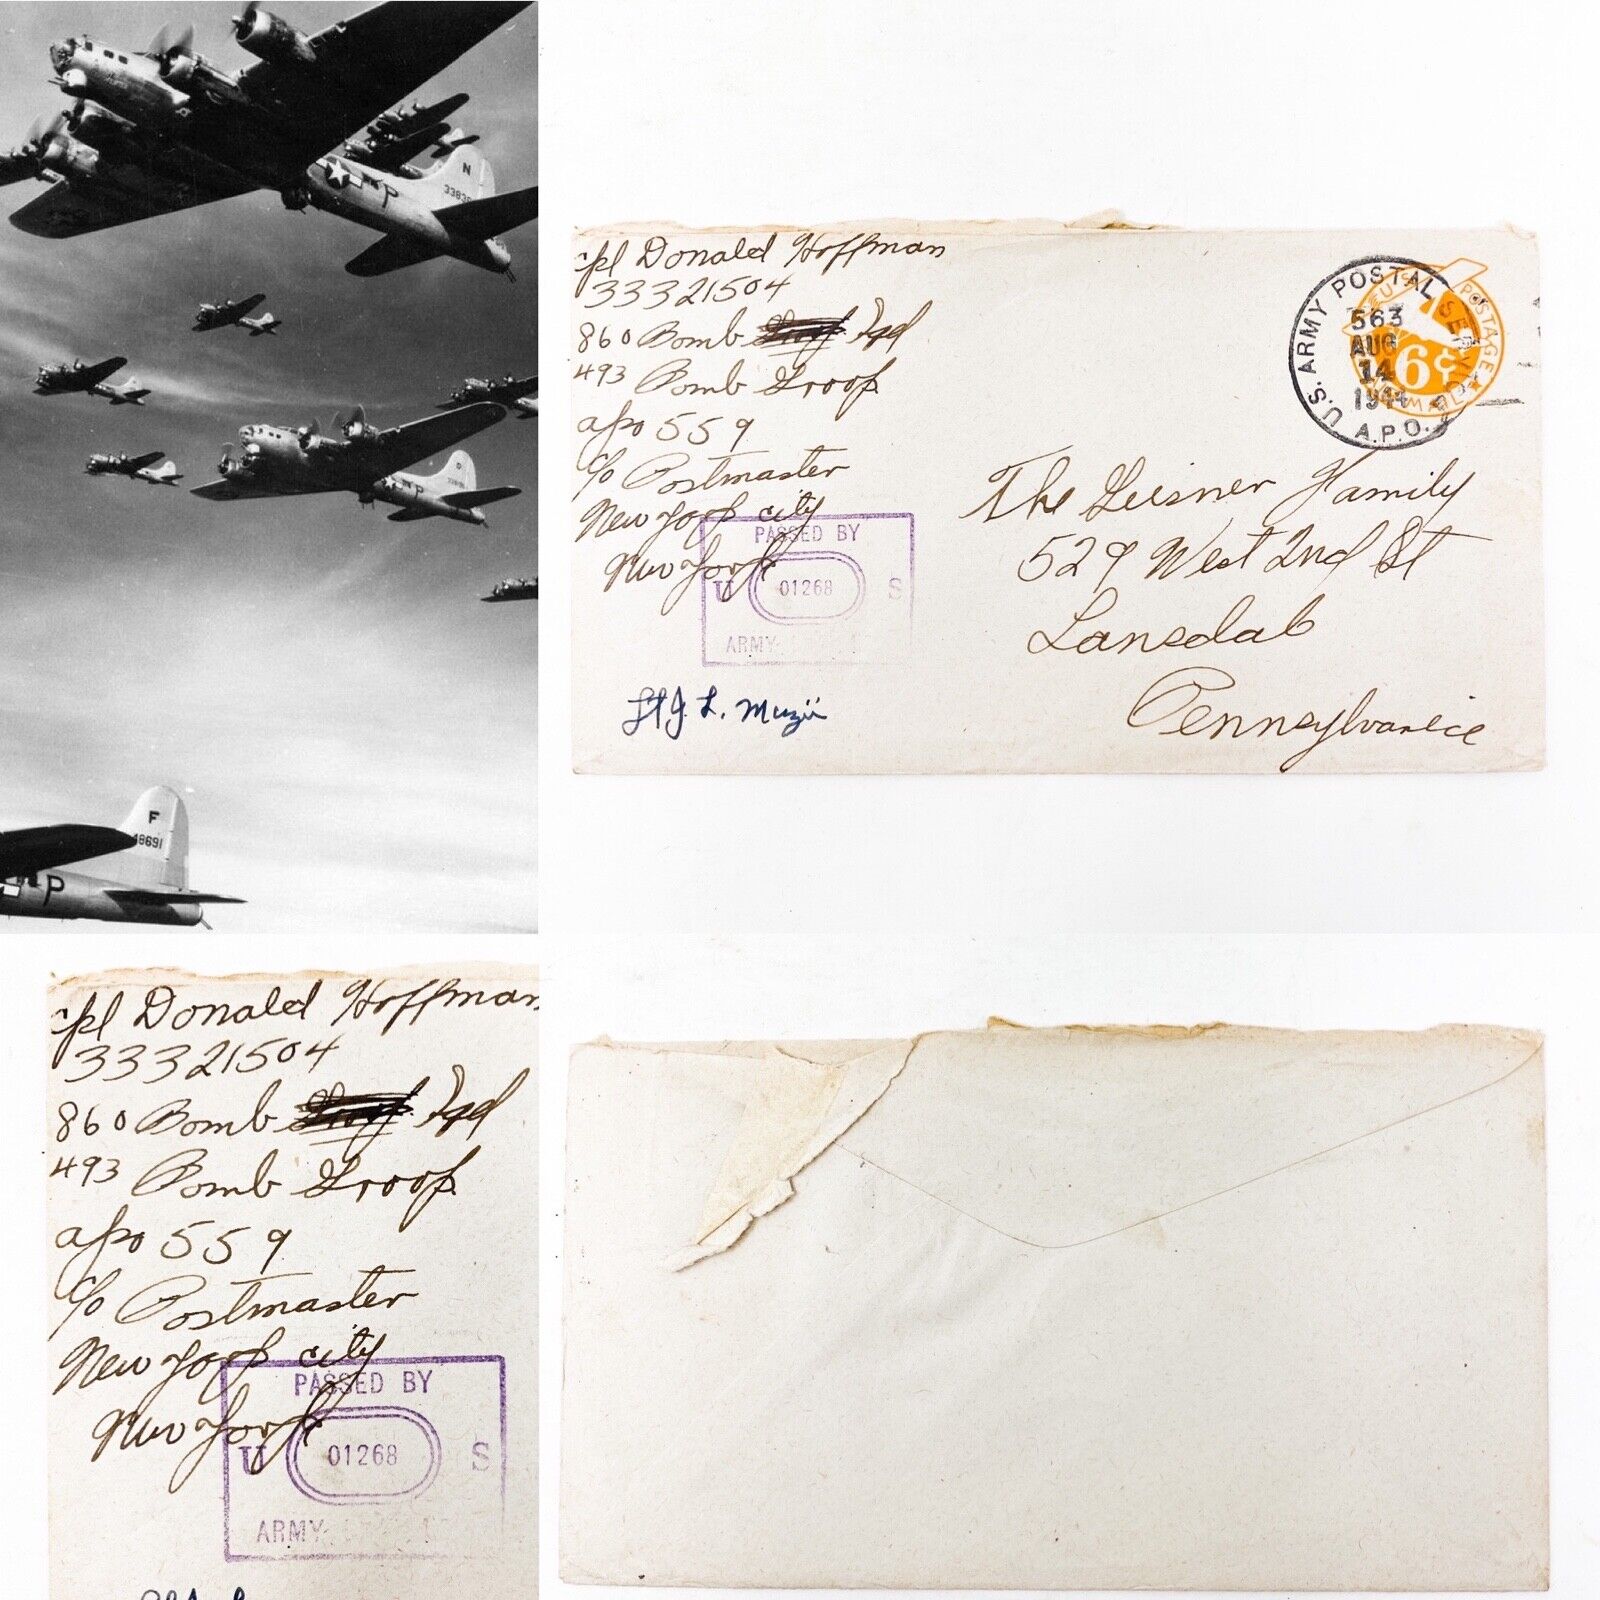 WWII Censored Donald Hoffman - 860th Bombardment Squadron Letter Cover Relic